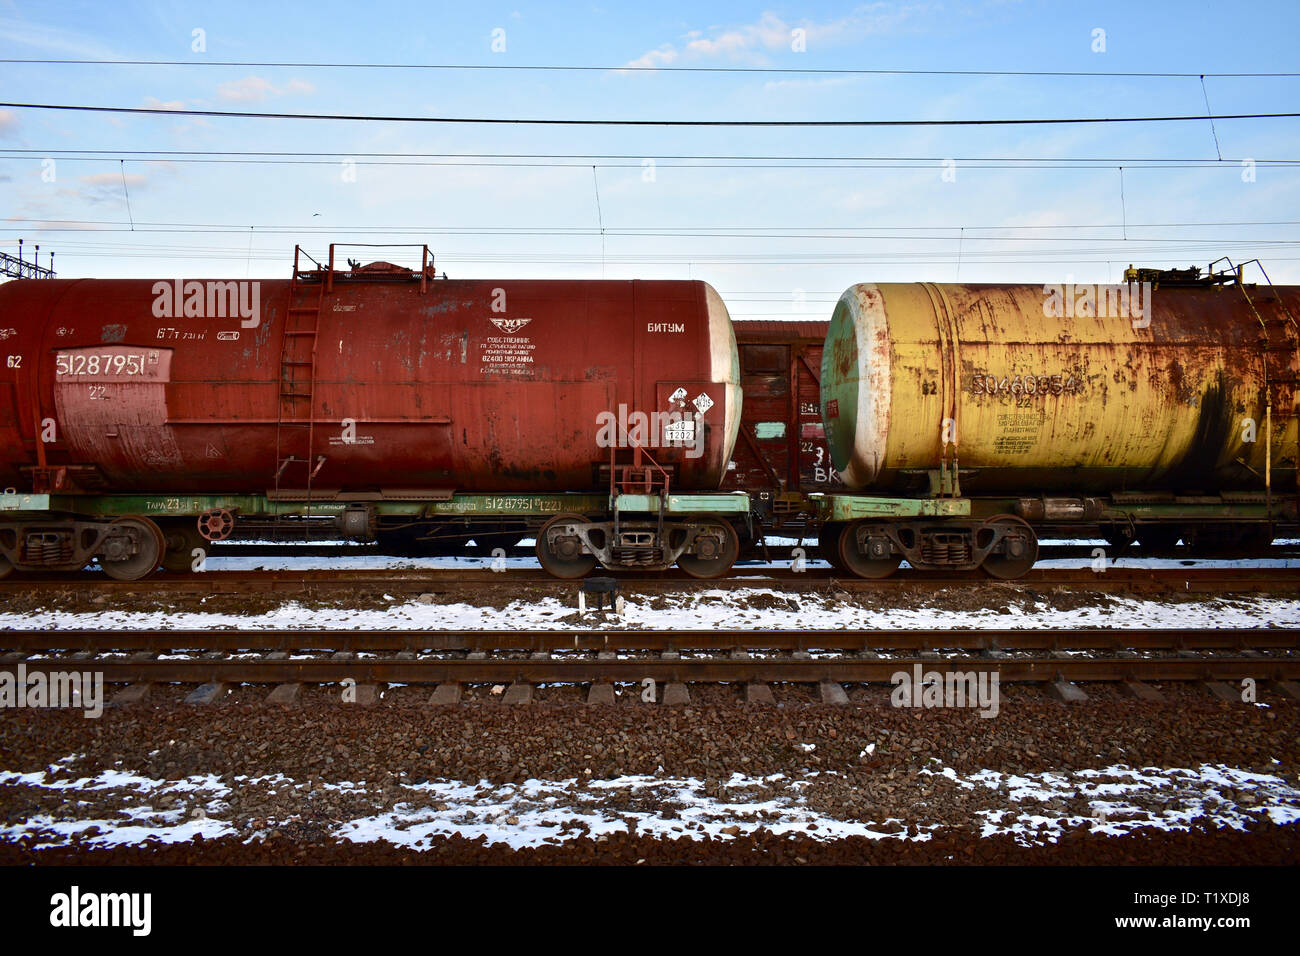 Tank wagons parked at a train station in Stryi, Ukraine Stock Photo